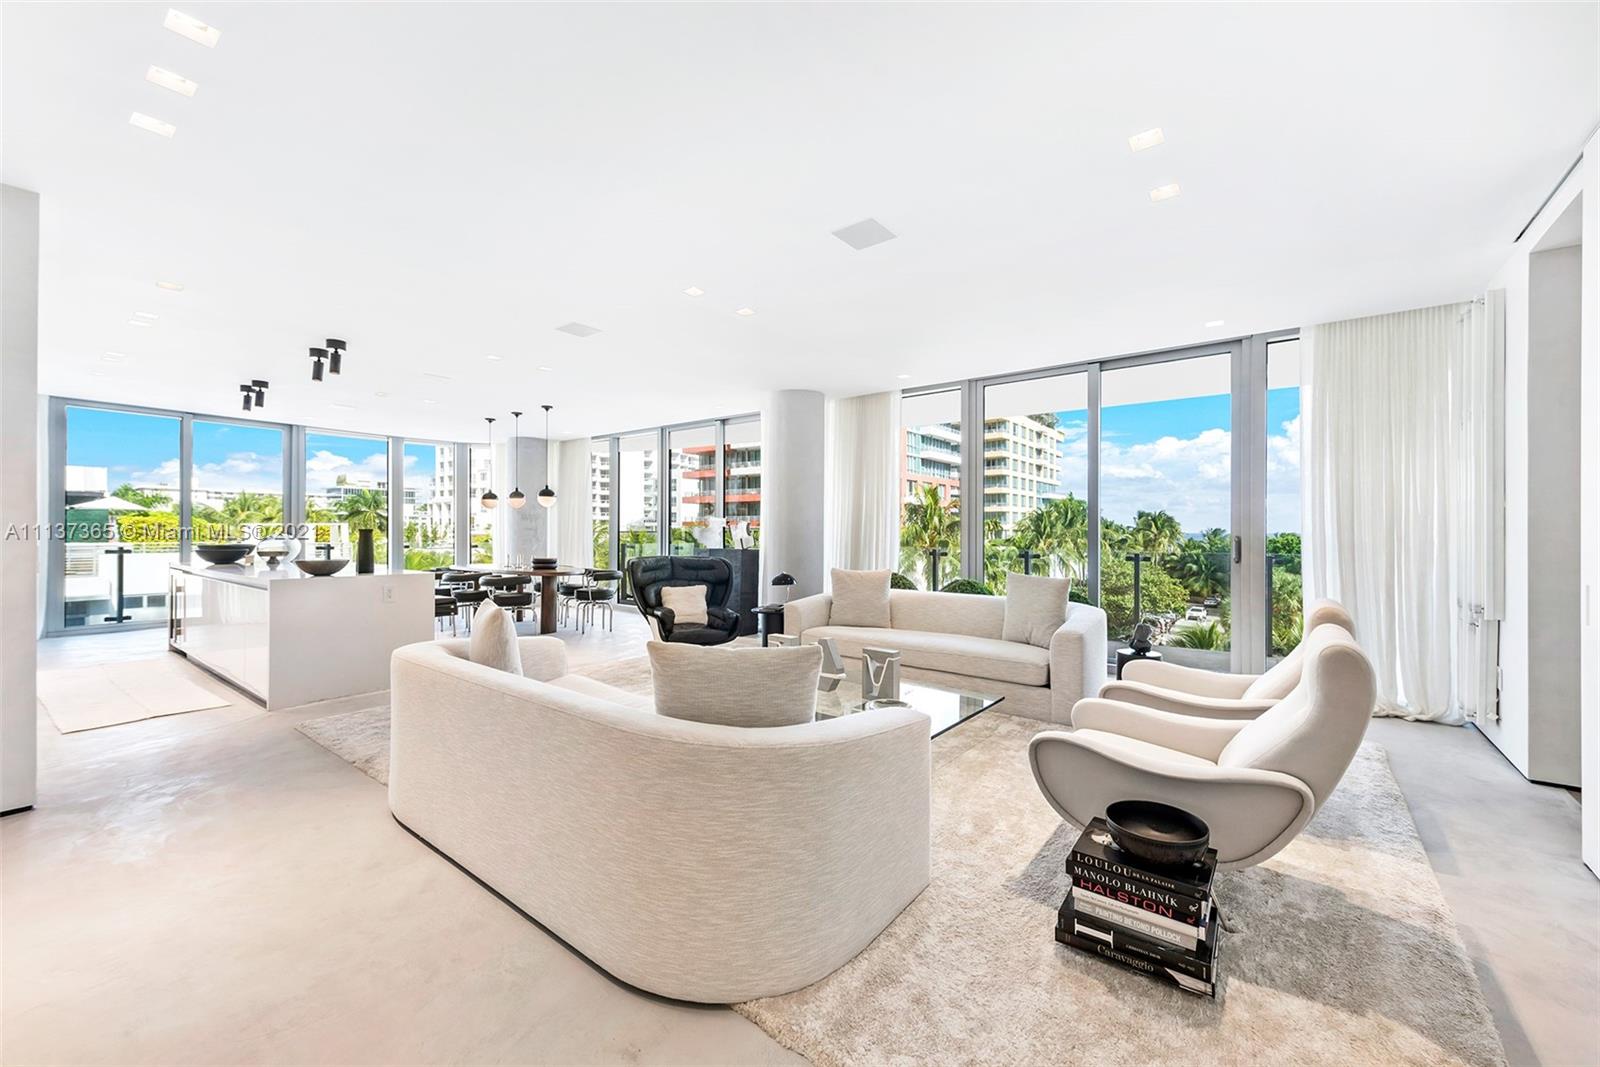 Stunning One Ocean residence 1 block from ocean offers sophisticated SoBe living at its most hip/luxurious. Brilliant natural light, floor-to-ceiling impact glass w water & city views distinguish this elite Briggs Edward Solomon appointed unit w sleek, ultra-modern & elegantly edgy interiors.  Crisp white esthetic incredible backdrop for art/sculpture/furniture. Poured concrete & Luminaire fixtures thruout. All bdrms en suite w/terraces. Lavish chef’s kitchen; open plan living/dining designed for entertaining. Enjoy sweeping 270° vistas from North Tower location w only 2 units per flr. Amenities: infinity-edge saltwater pool; full pool & beach services; fitness center & spa; 24-hour concierge & security; valet service; maintenance.  Vibrant, walkable South of Fifth neighborhood. Paradise!